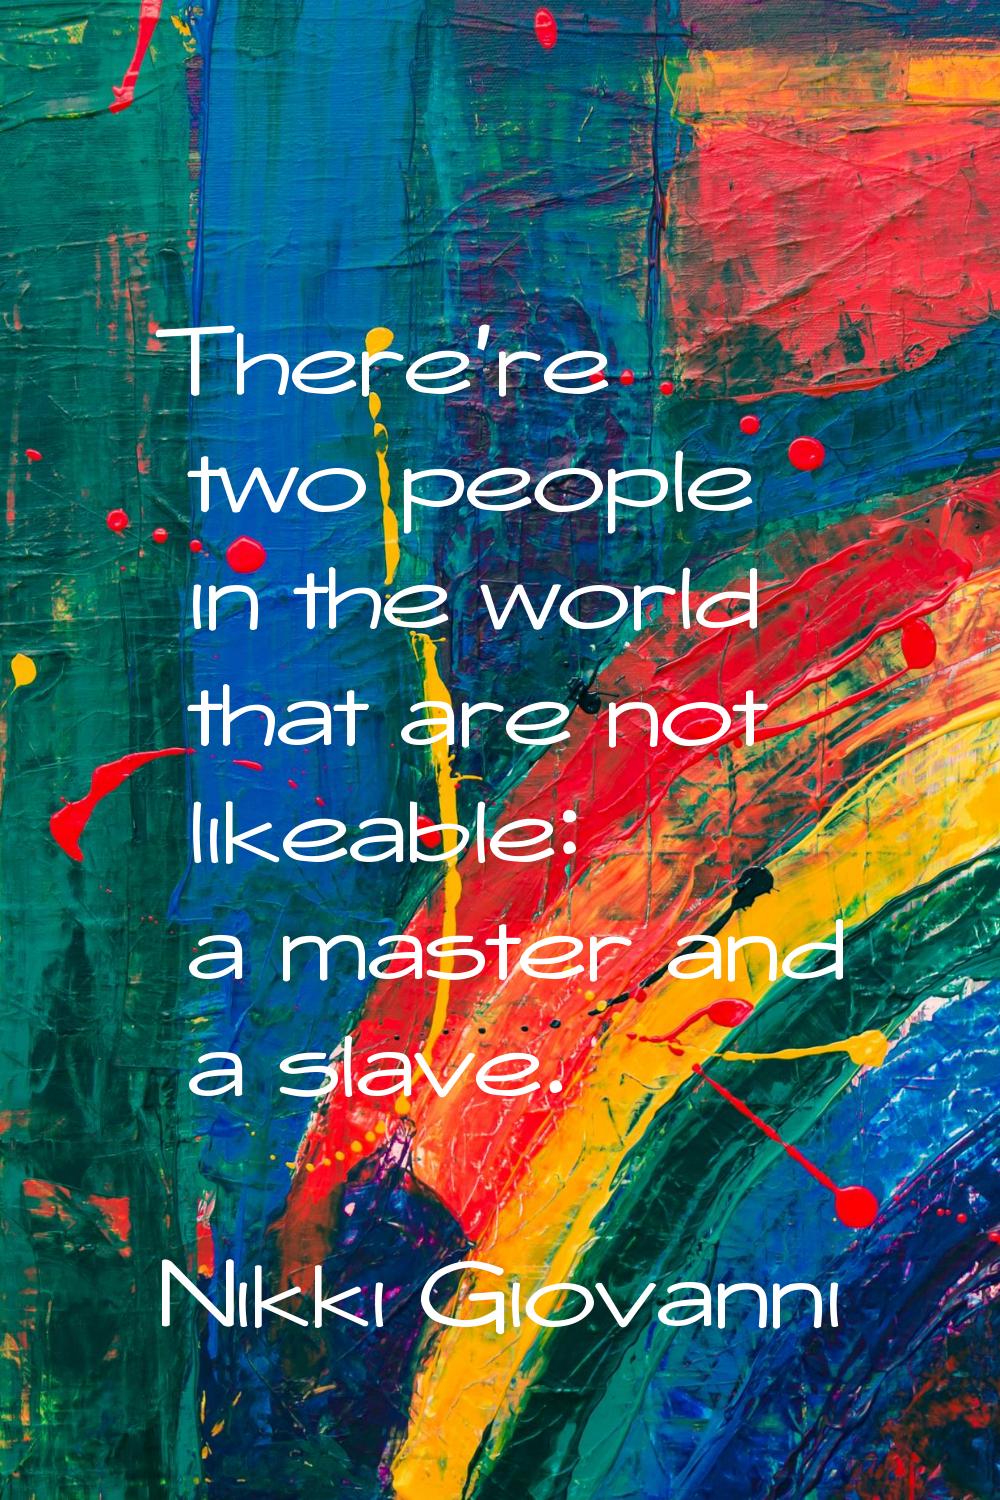 There're two people in the world that are not likeable: a master and a slave.